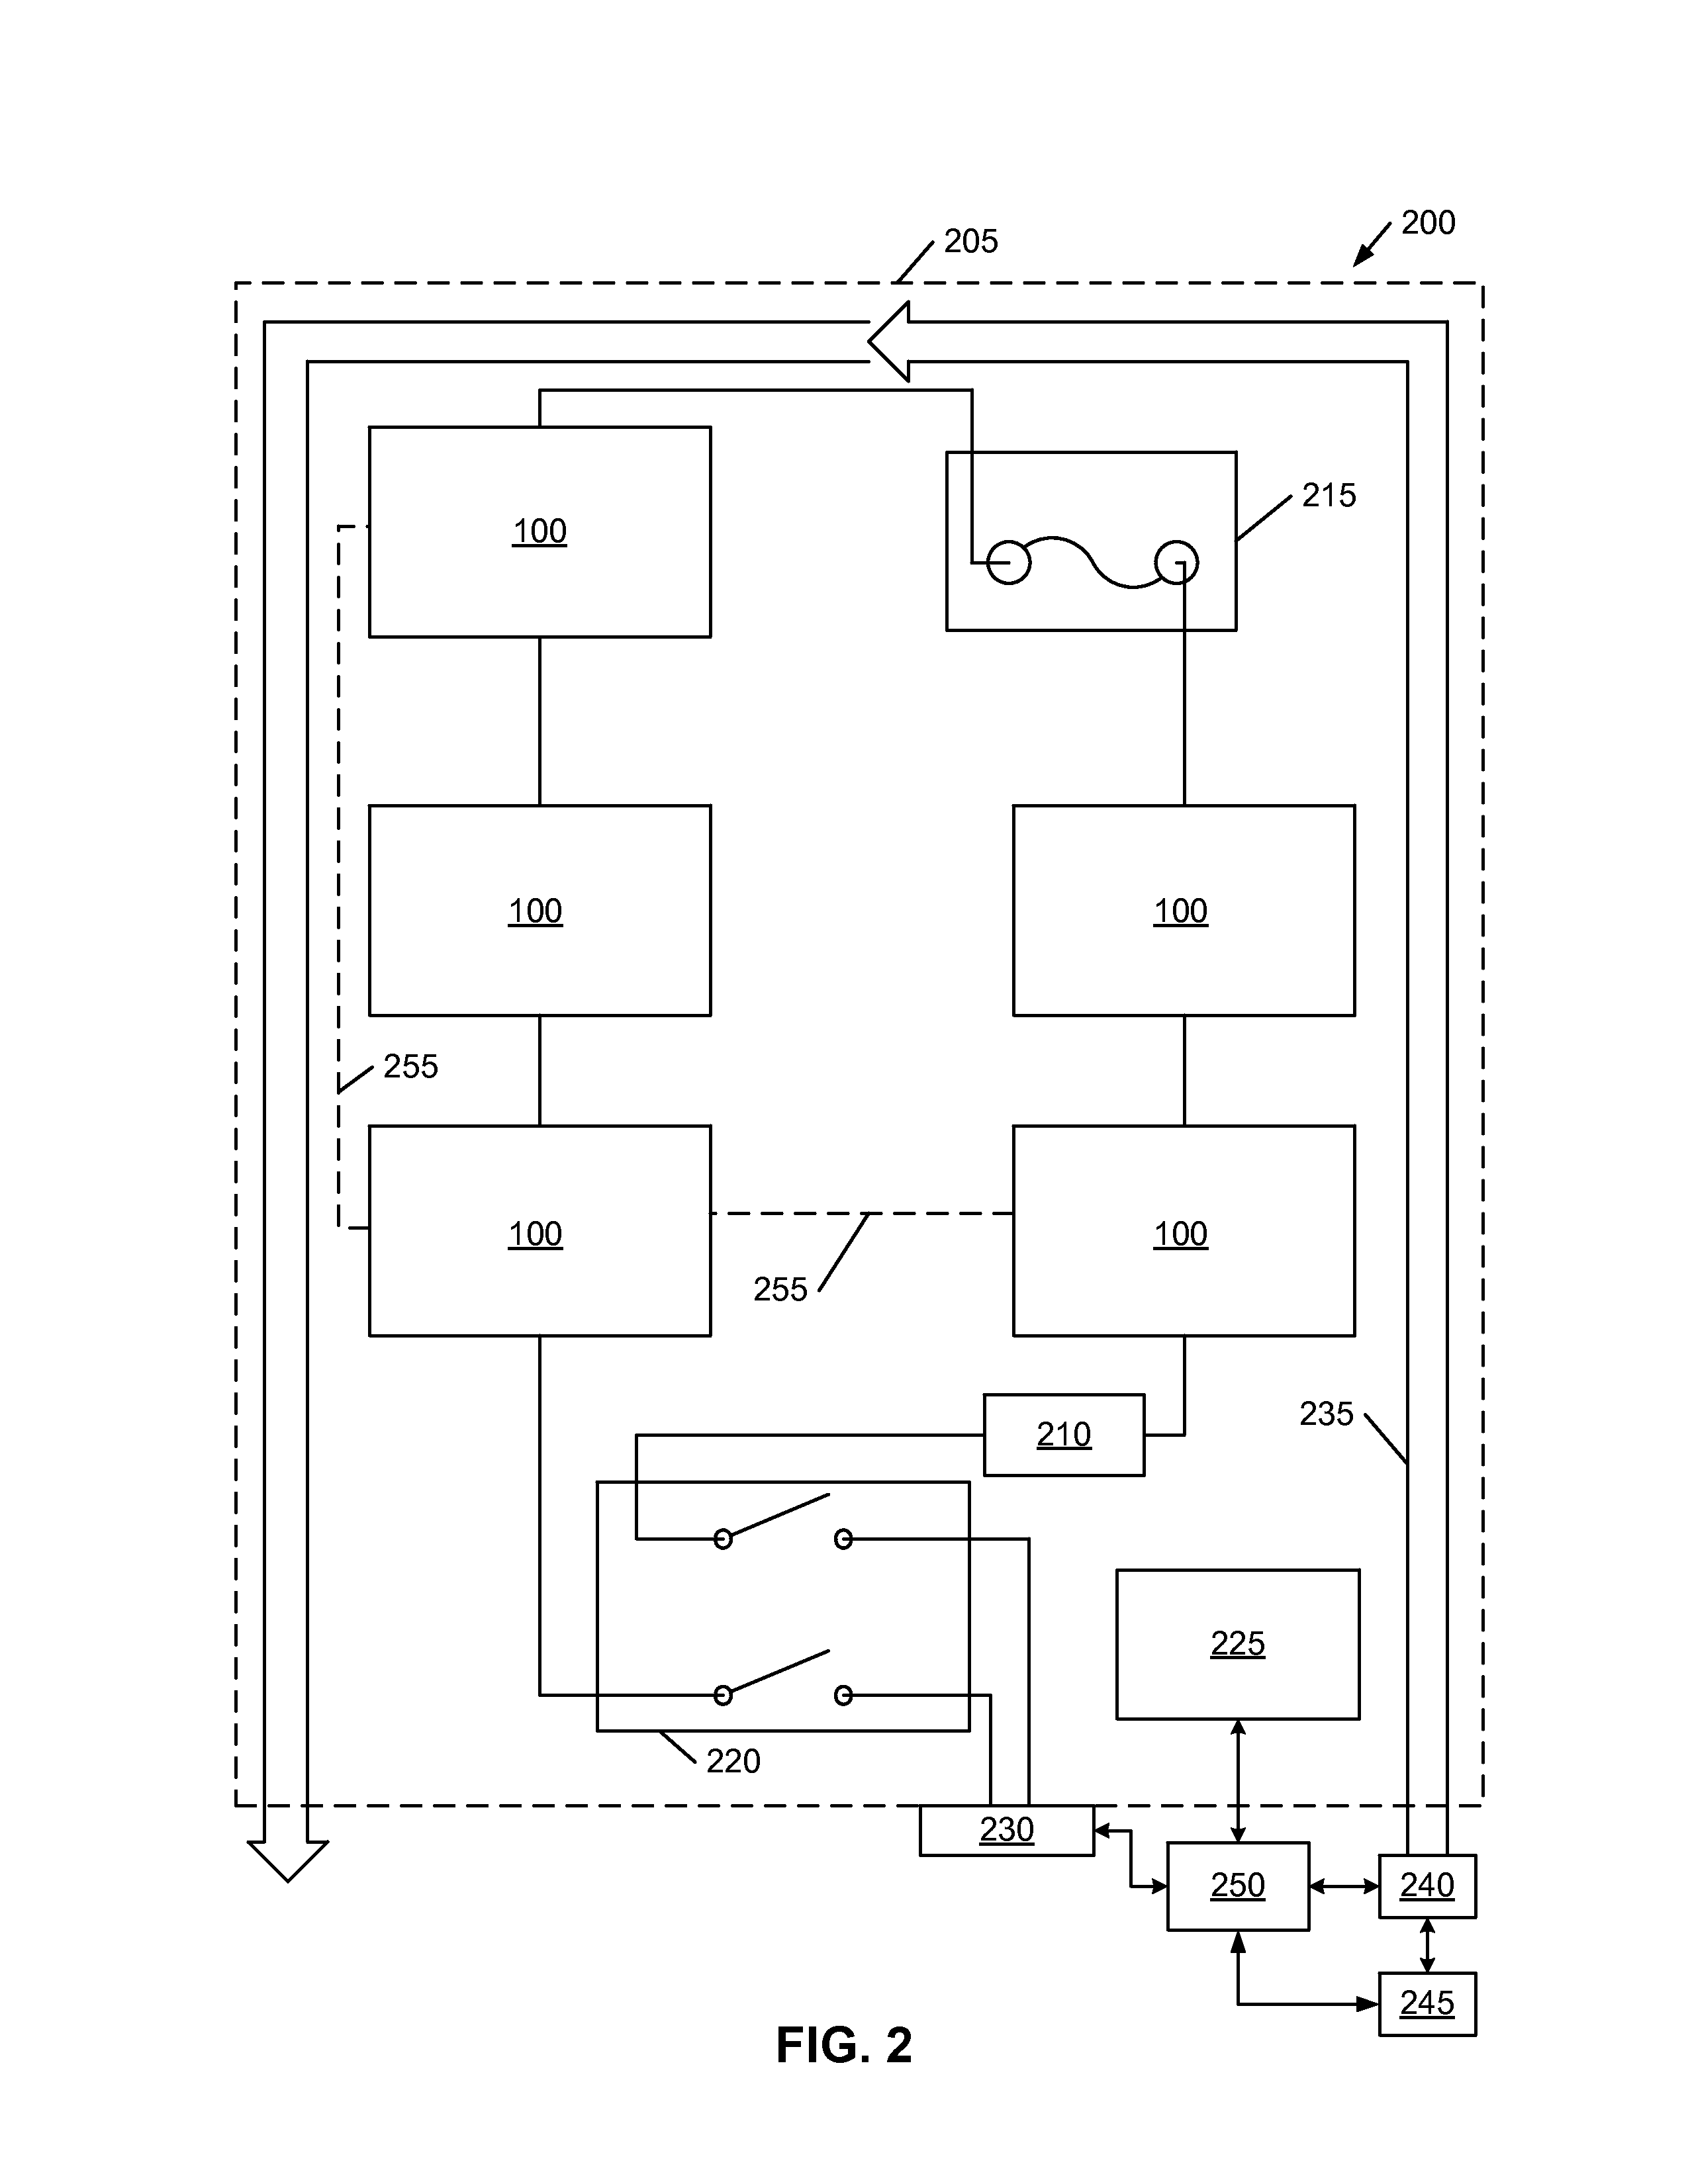 Detection of over-current in a battery pack